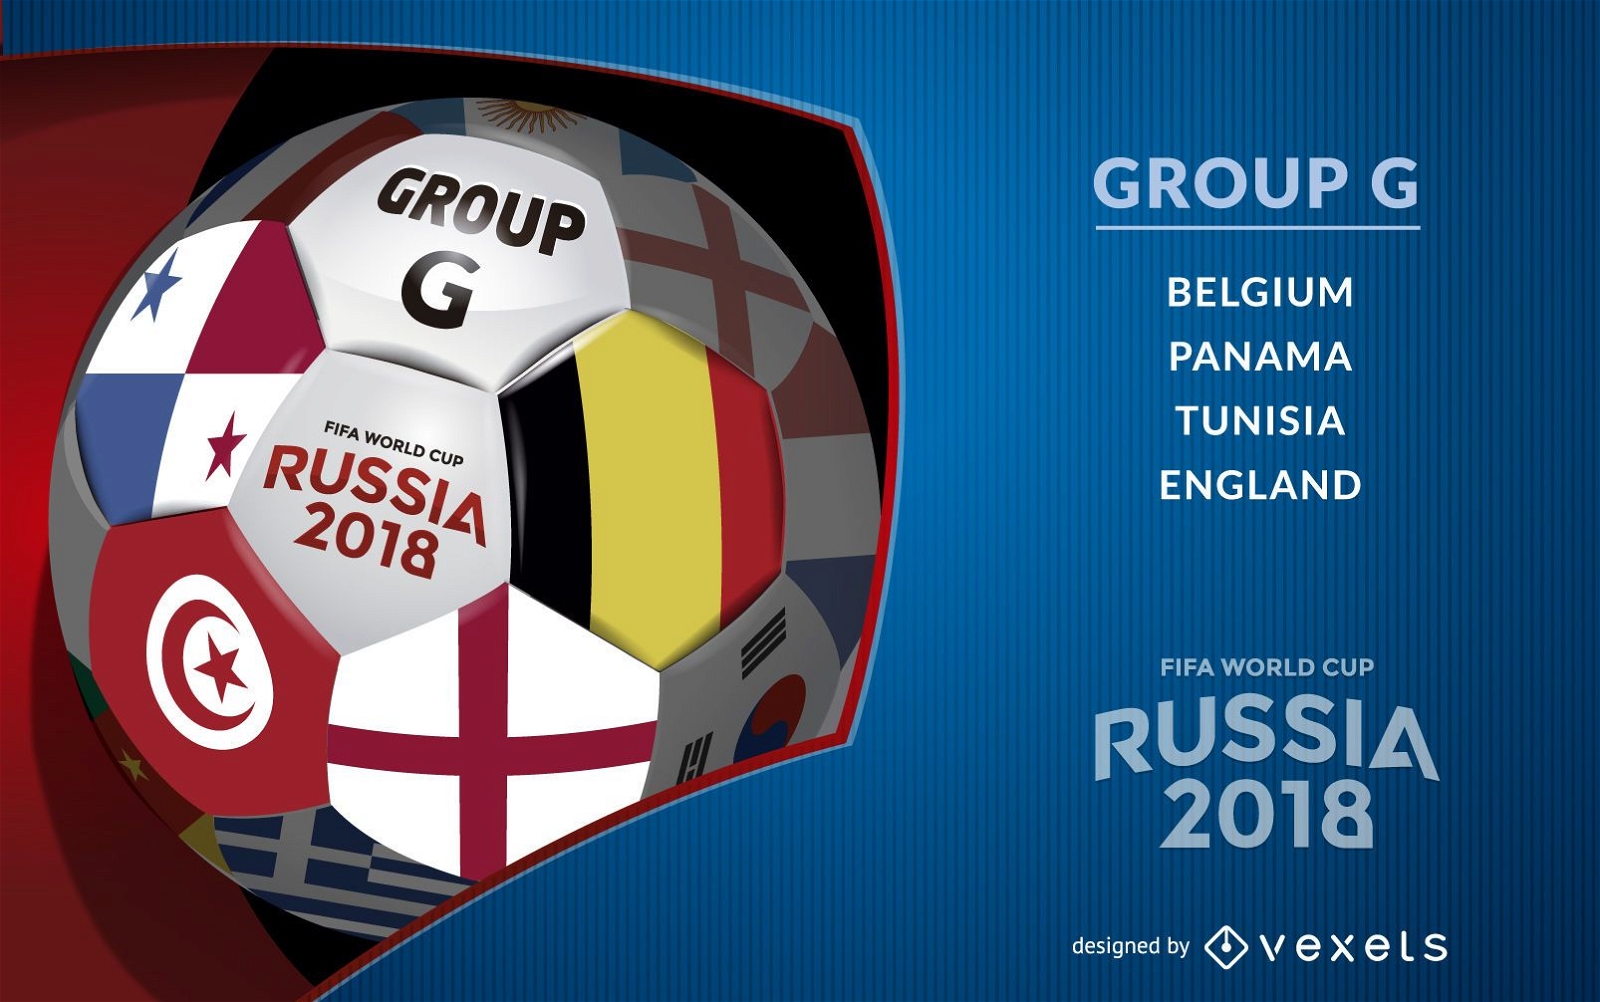 Russia 2018 Group G poster